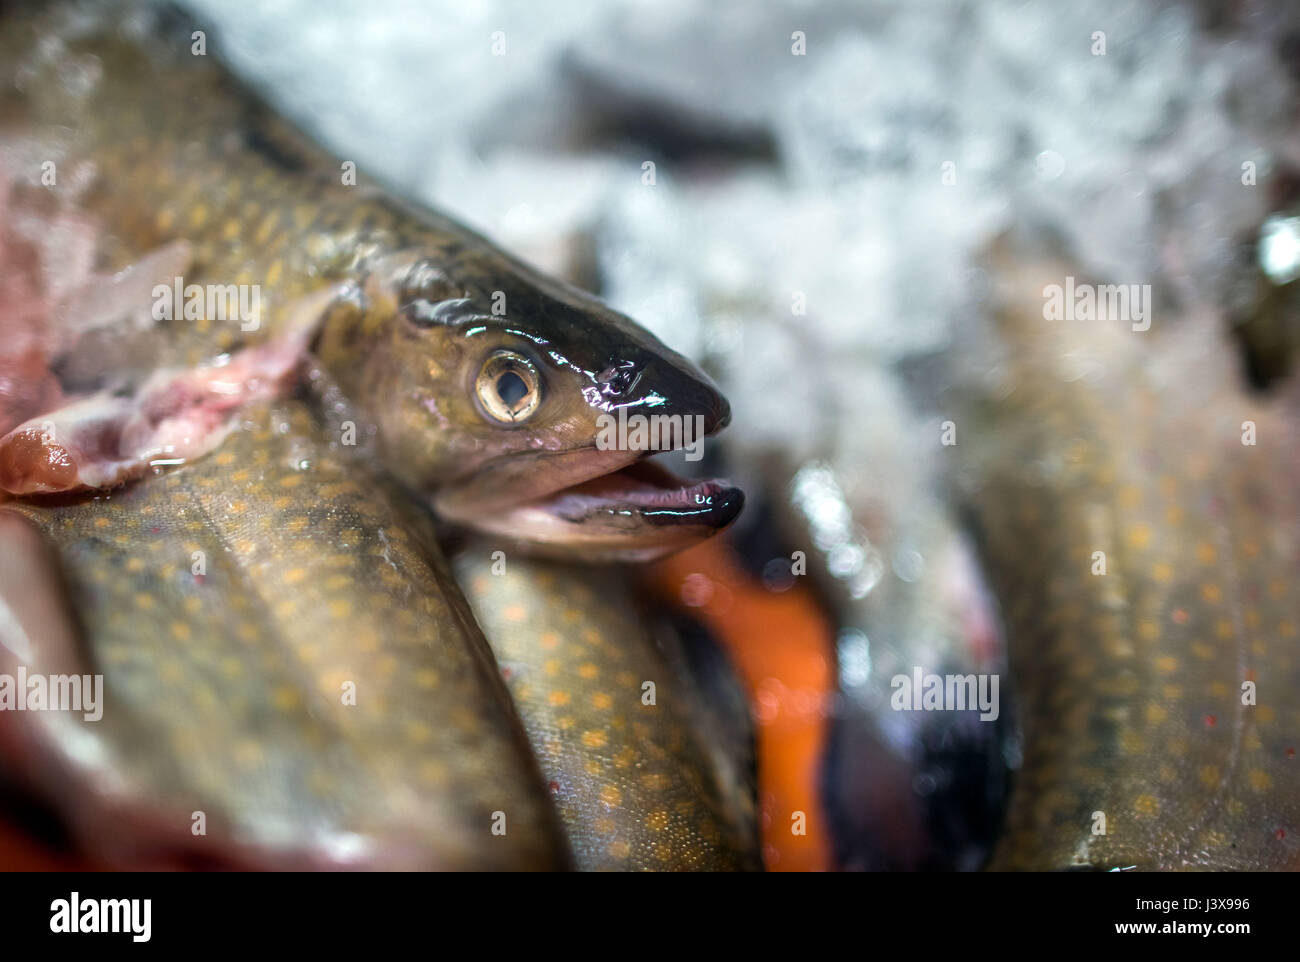 Vipperow, Germany. 4th May, 2017. Freshly caught char fish are placed on ice at the fish farm at the Mueritz in Vipperow, Germany, 4 May 2017. The fish farm is part of the largest inland fishery in Germany: Fishery Mueitz-Plau GmbH. Besides the tradition fishery and the breeding of fish, modern aqua culture is also part of the business. The fishery, founded in 1990 from the former production cooperative (founded 1952) holds more than 30.000 hectars of water. Photo: Jens Büttner/dpa-Zentralbild/dpa/Alamy Live News Stock Photo